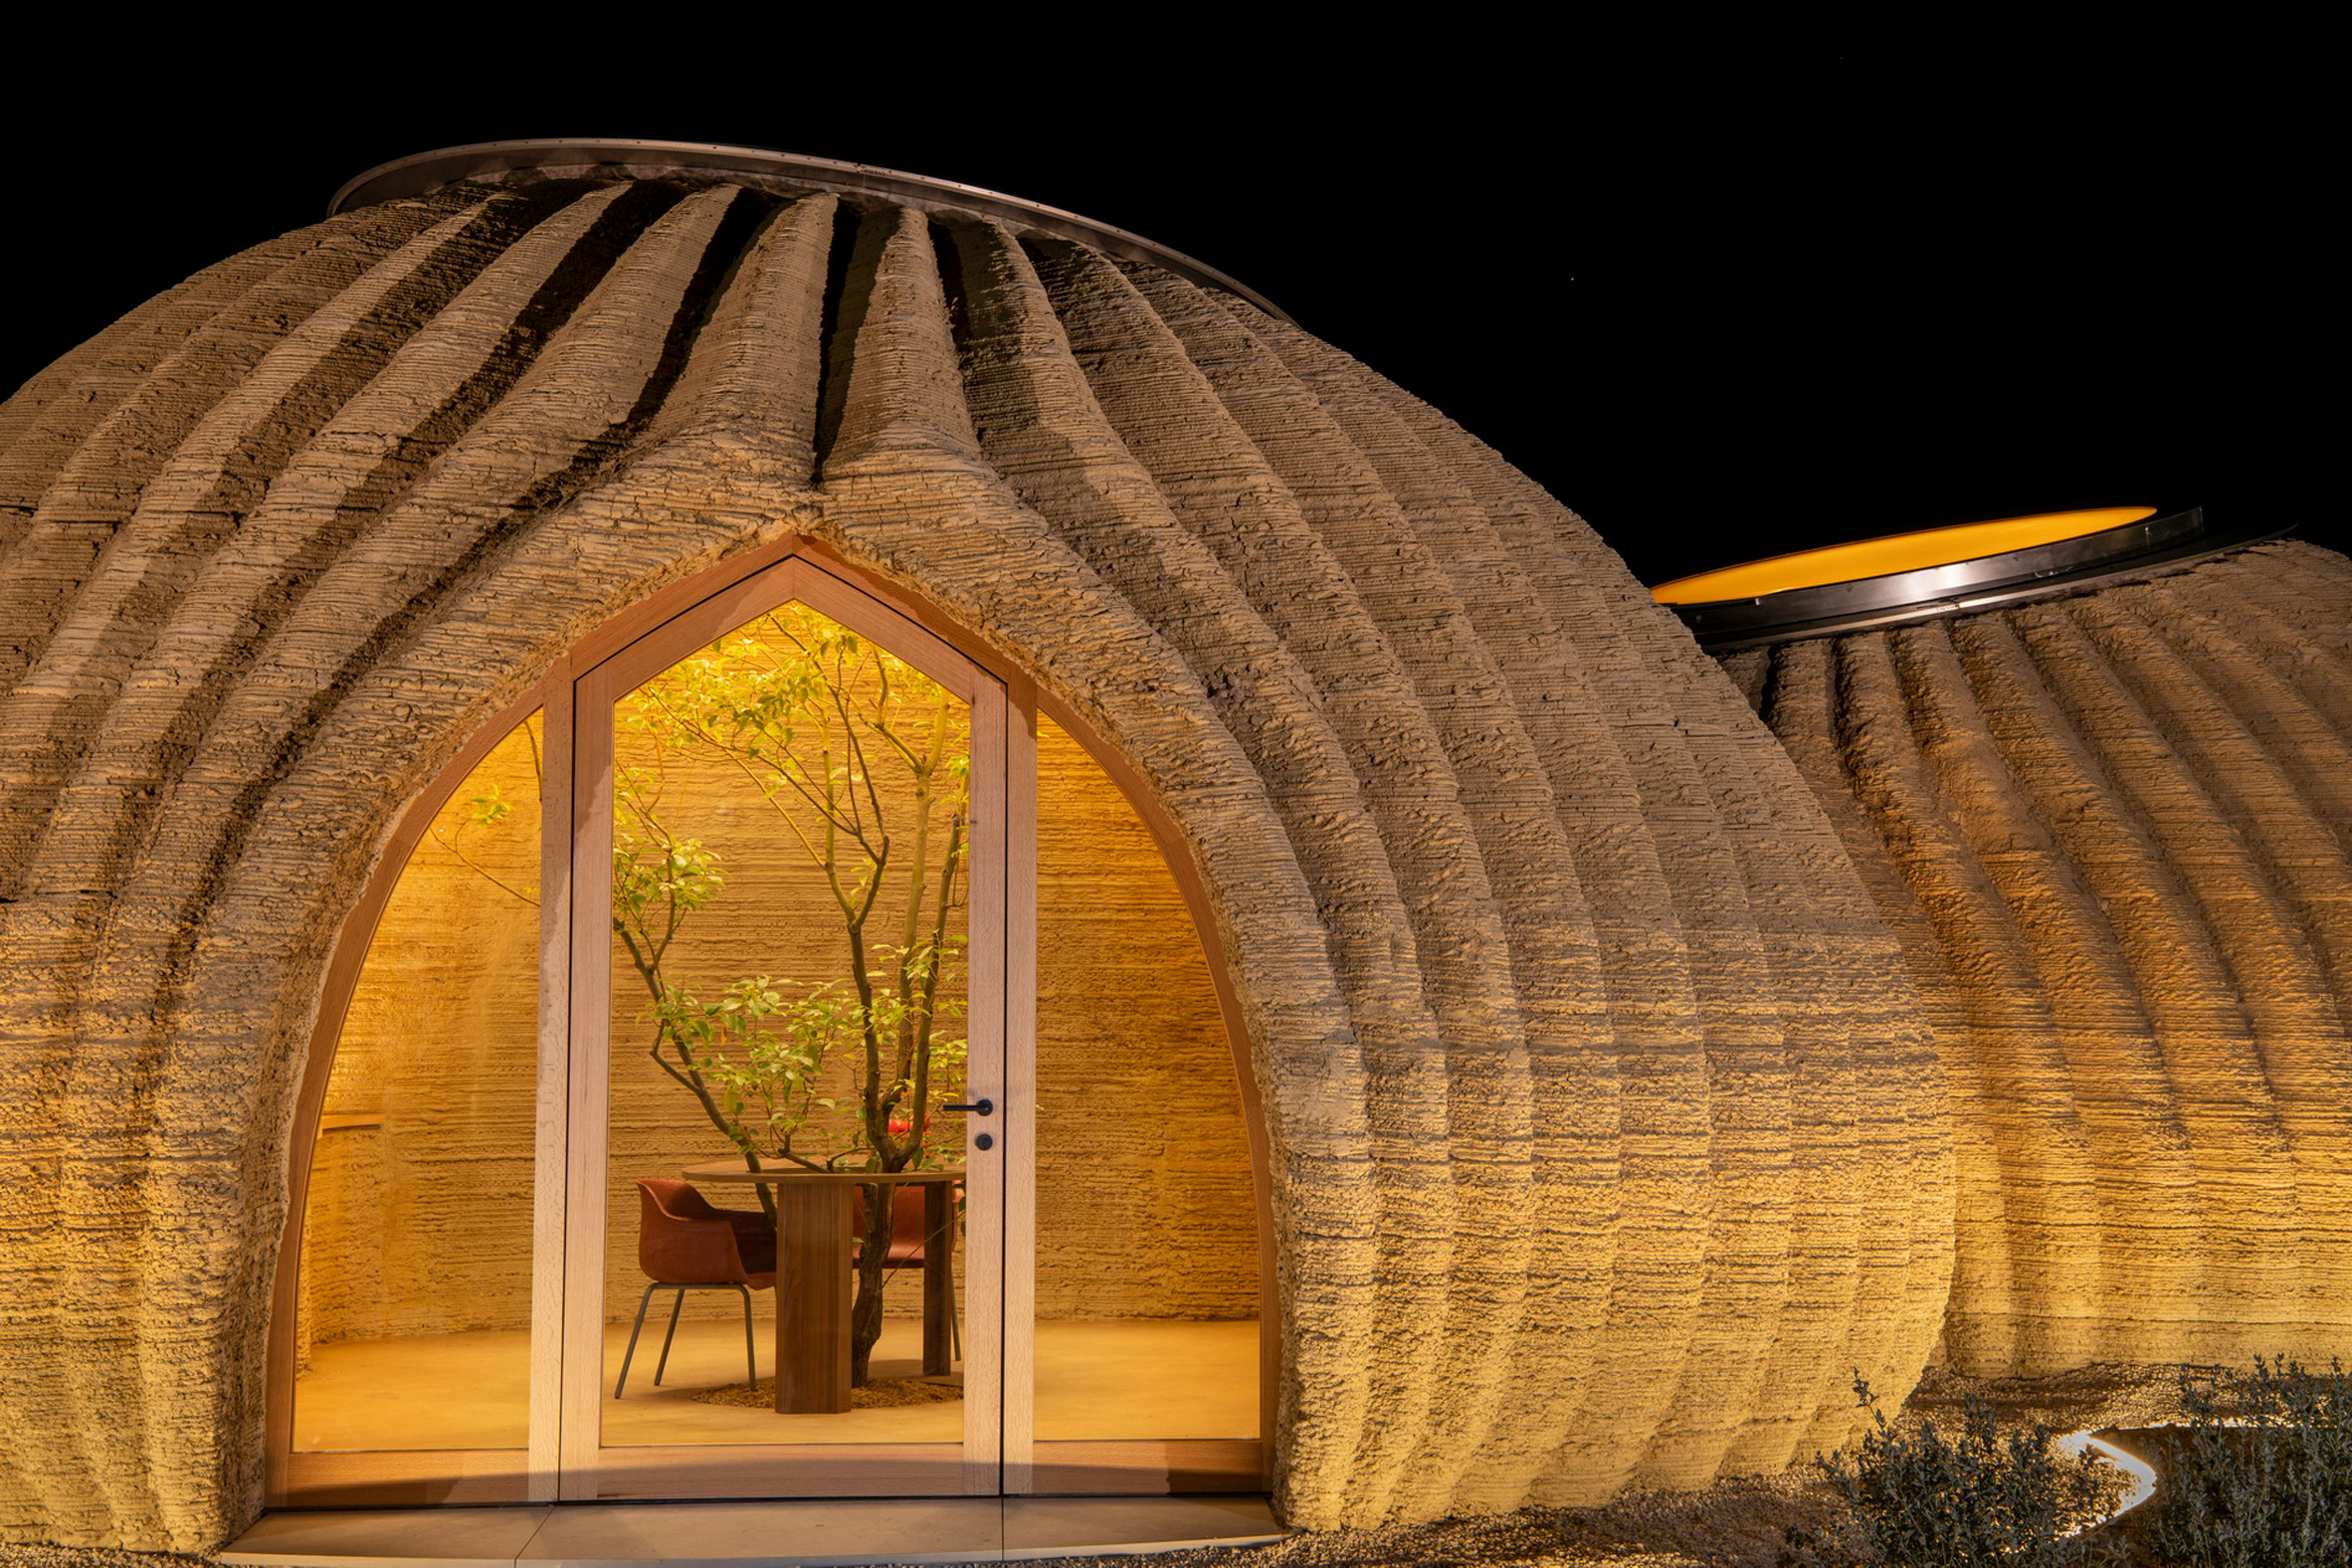 Tecla house 3D-printed from locally sourced clay